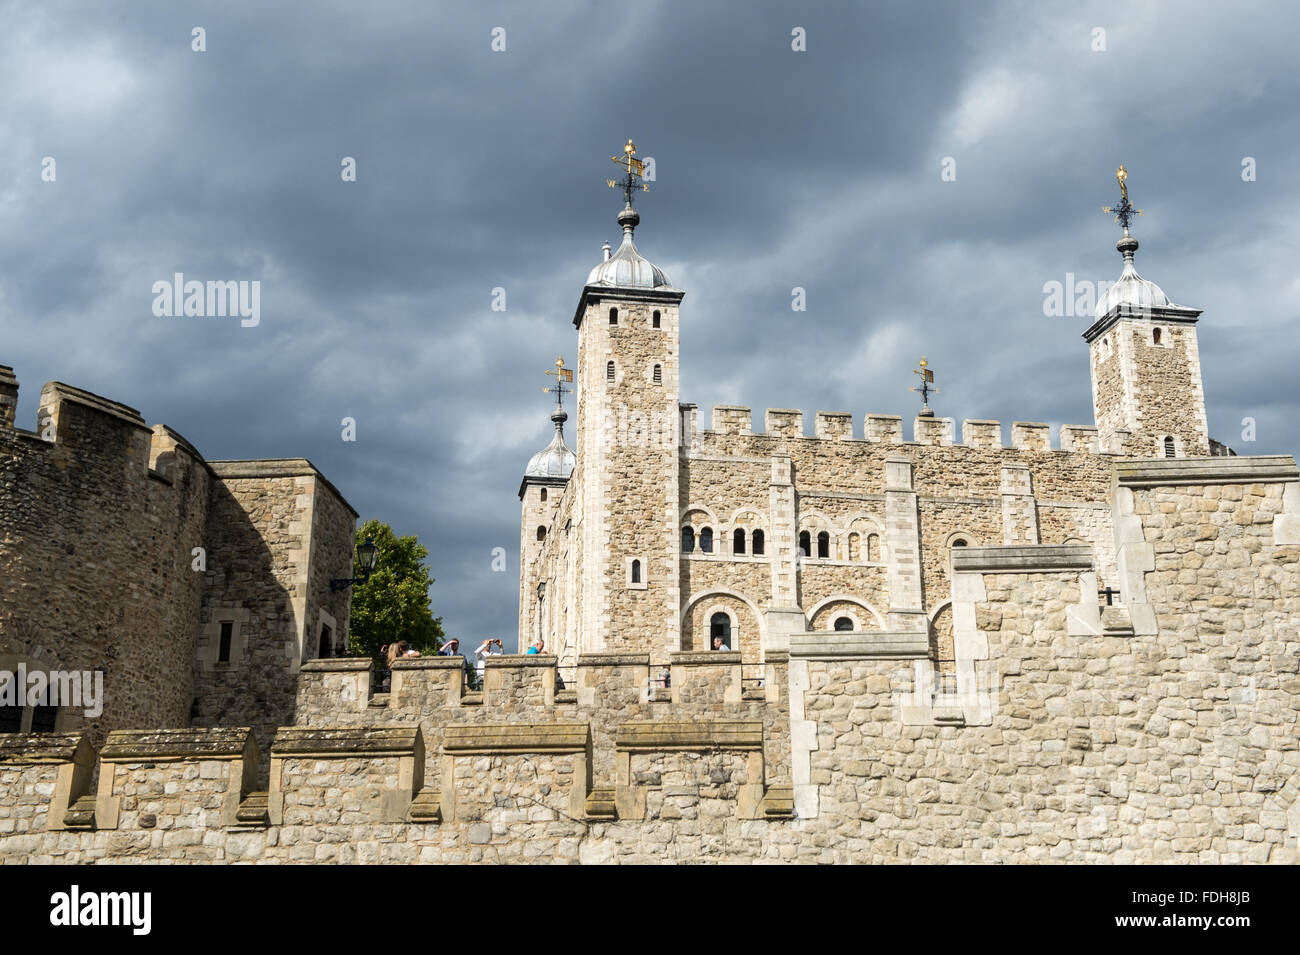 Tower of London in England, UK. Stock Photo